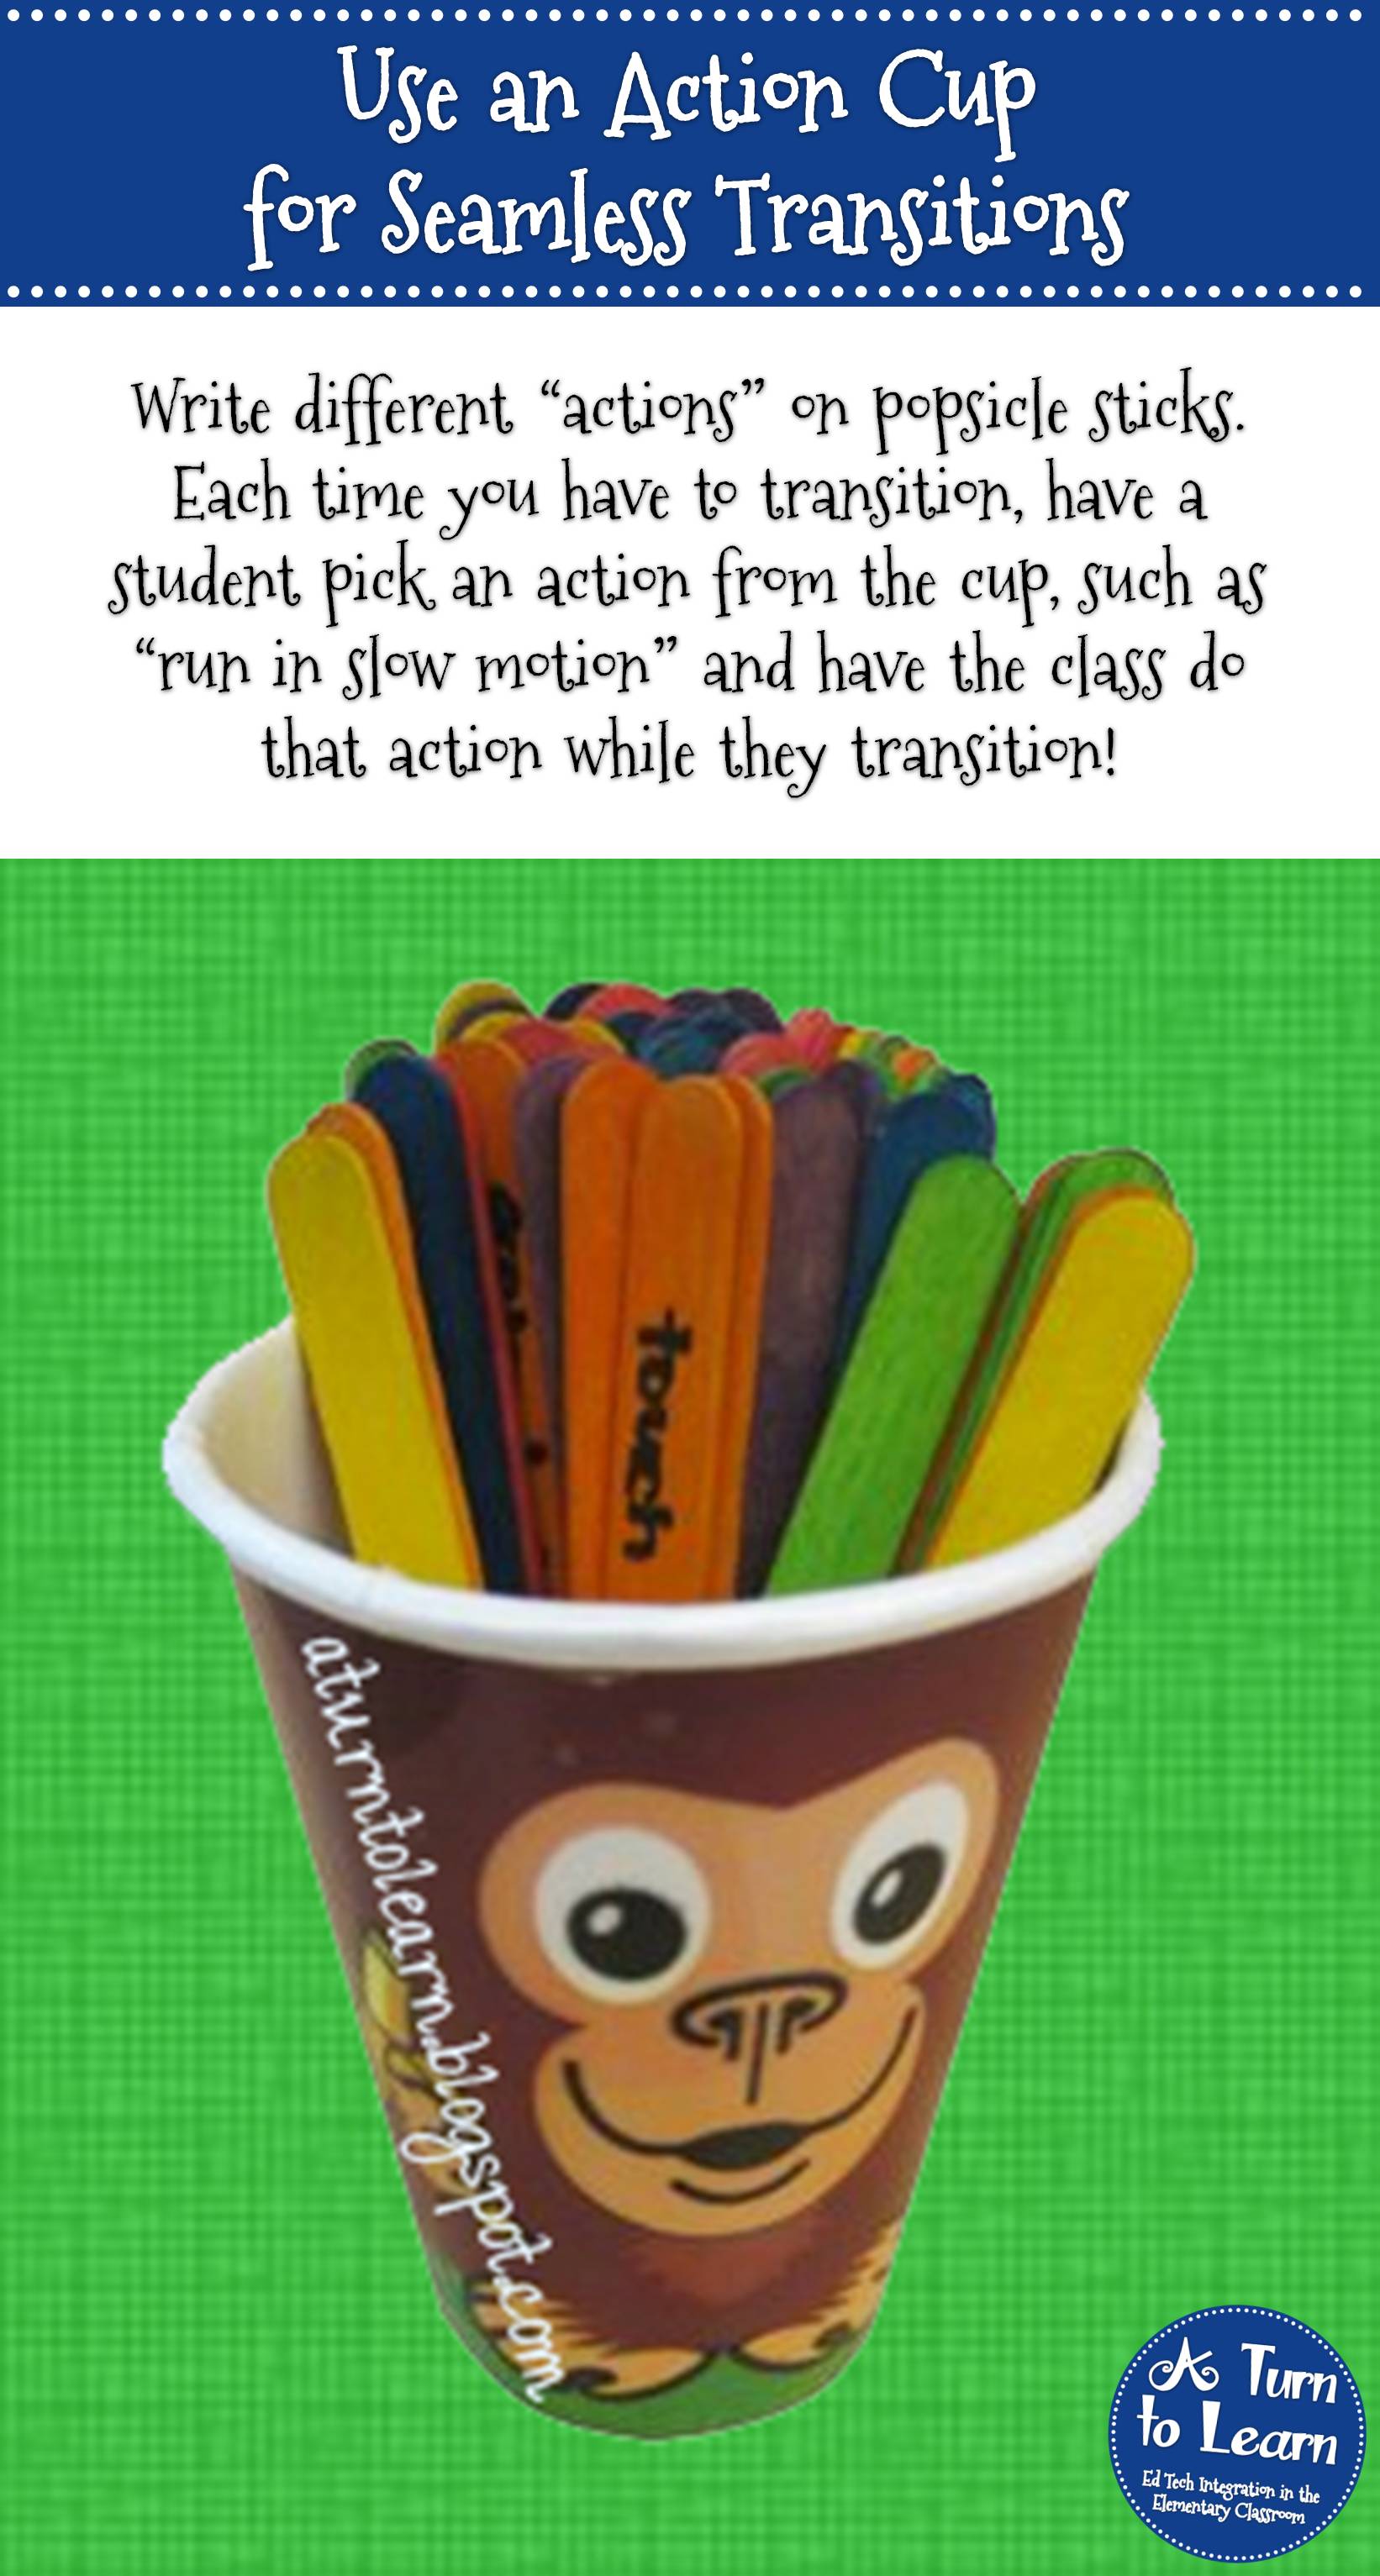 Use an Action Cup for Seamless Classroom Transitions in Kindergarten